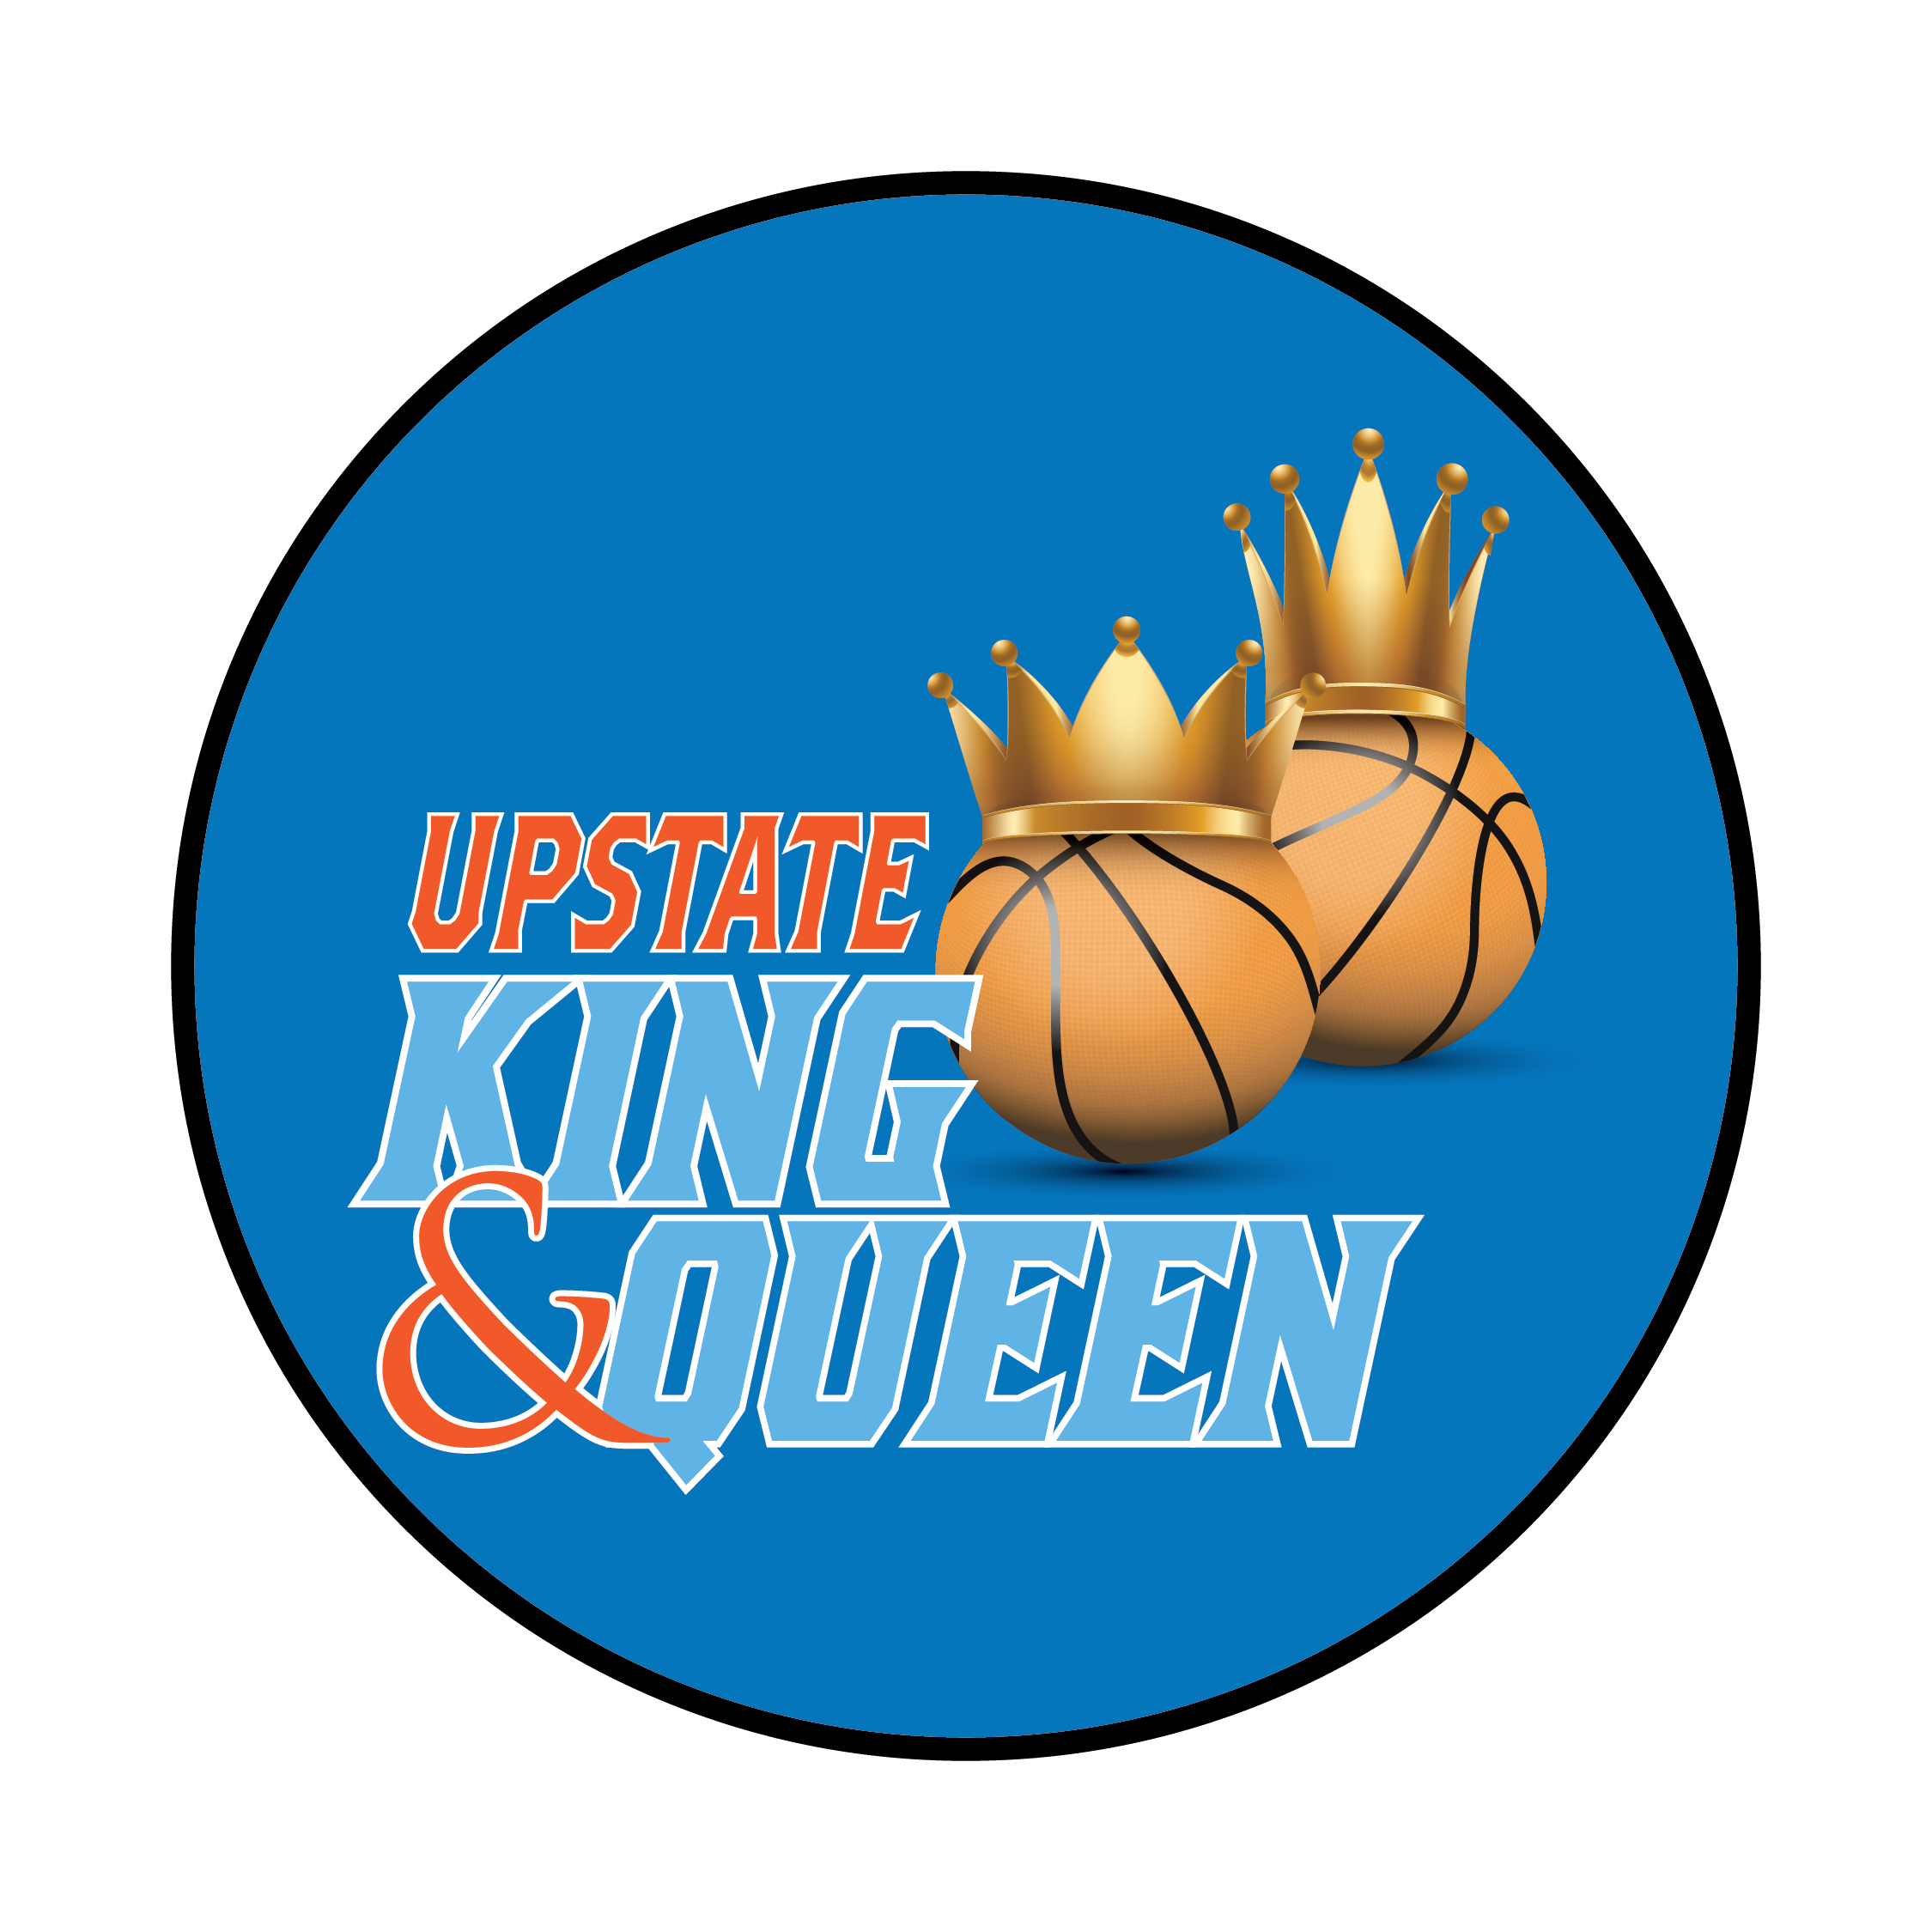 Upstate King and Queen